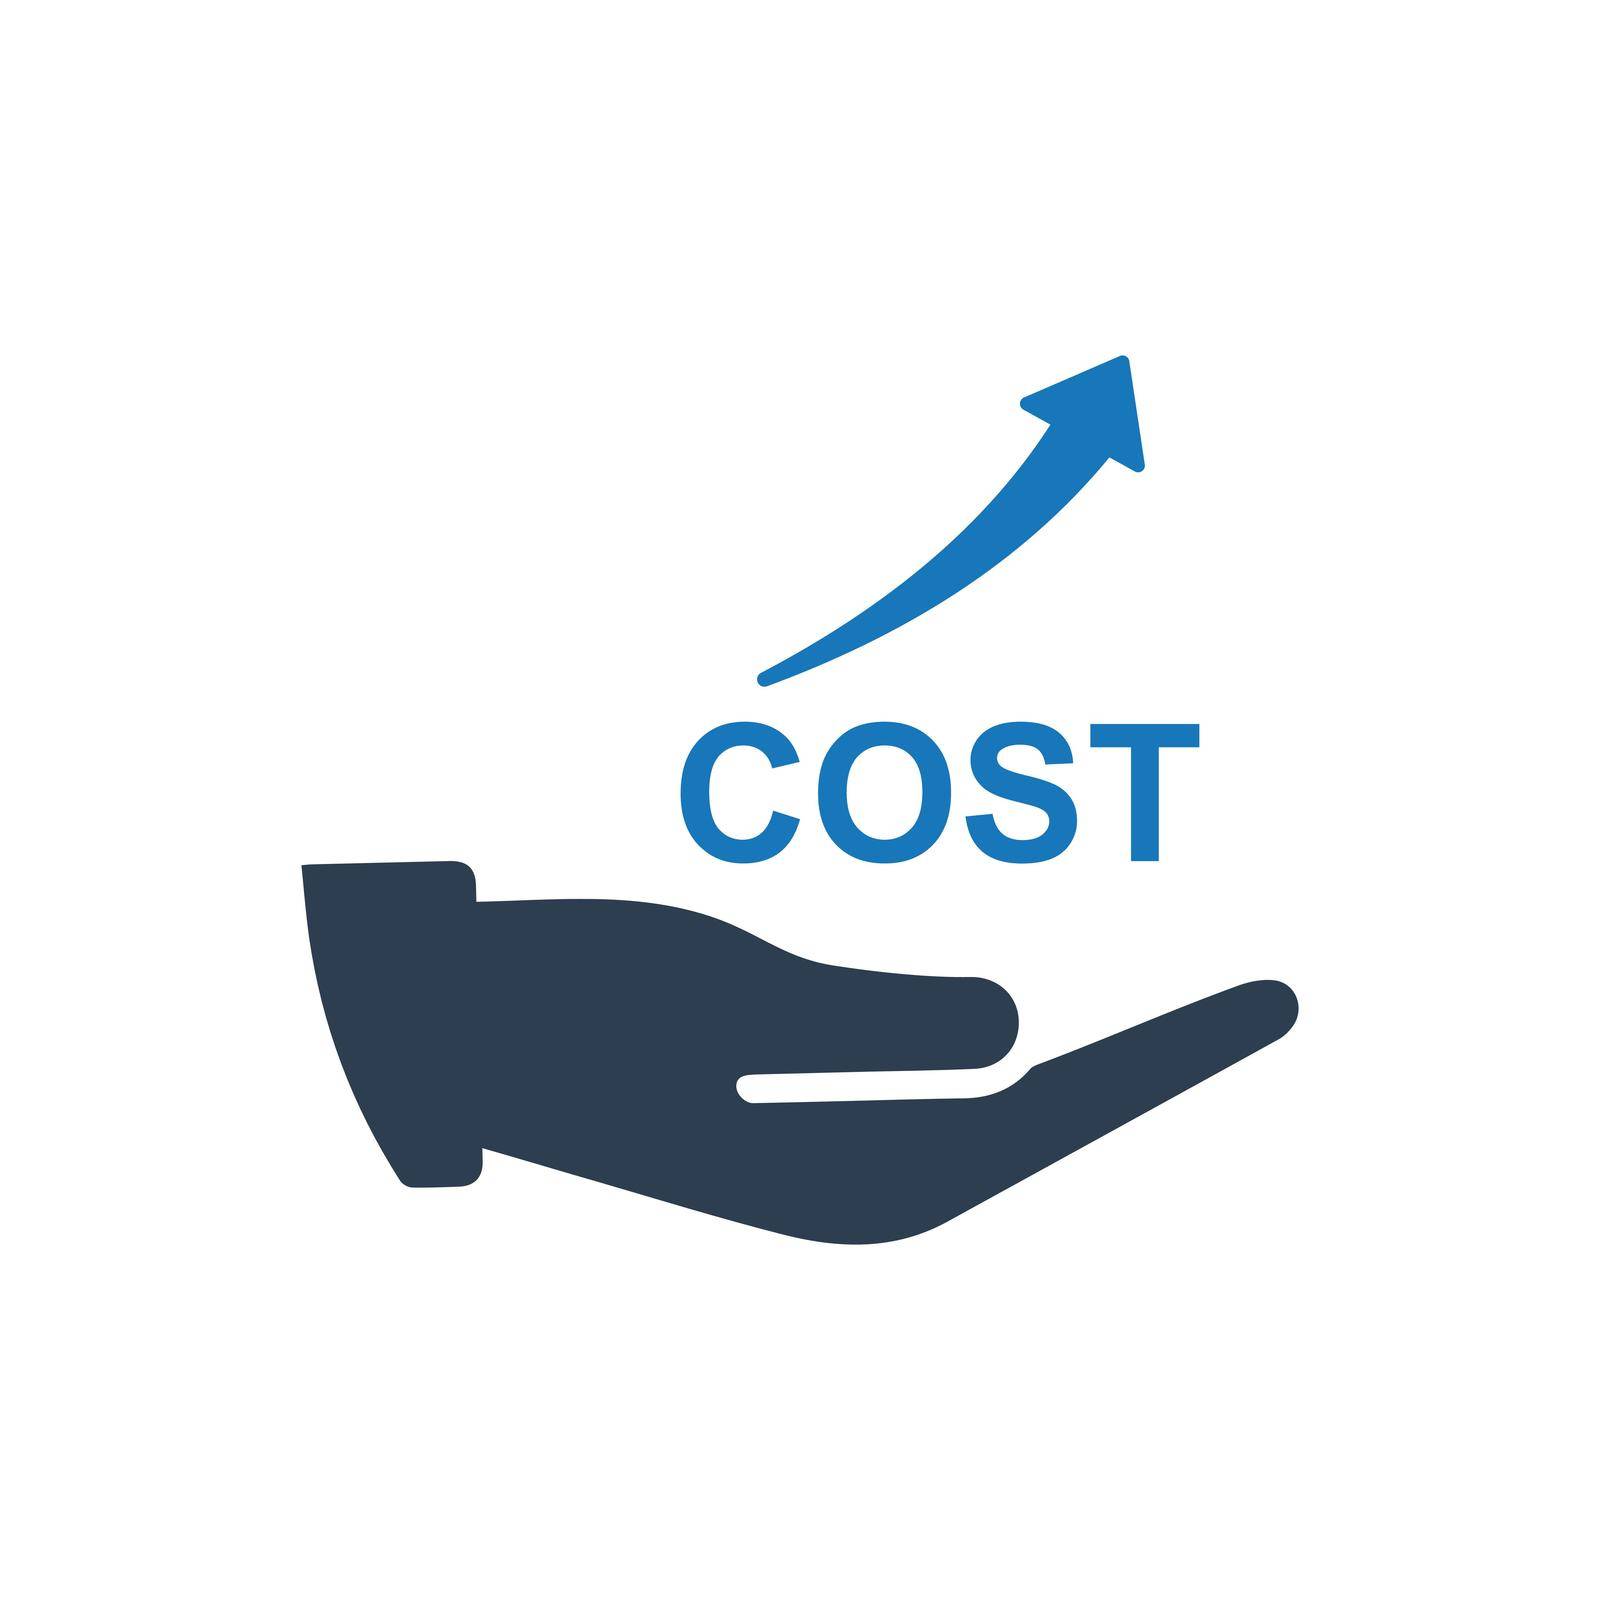 Rising Costs icon. Vector EPS file.